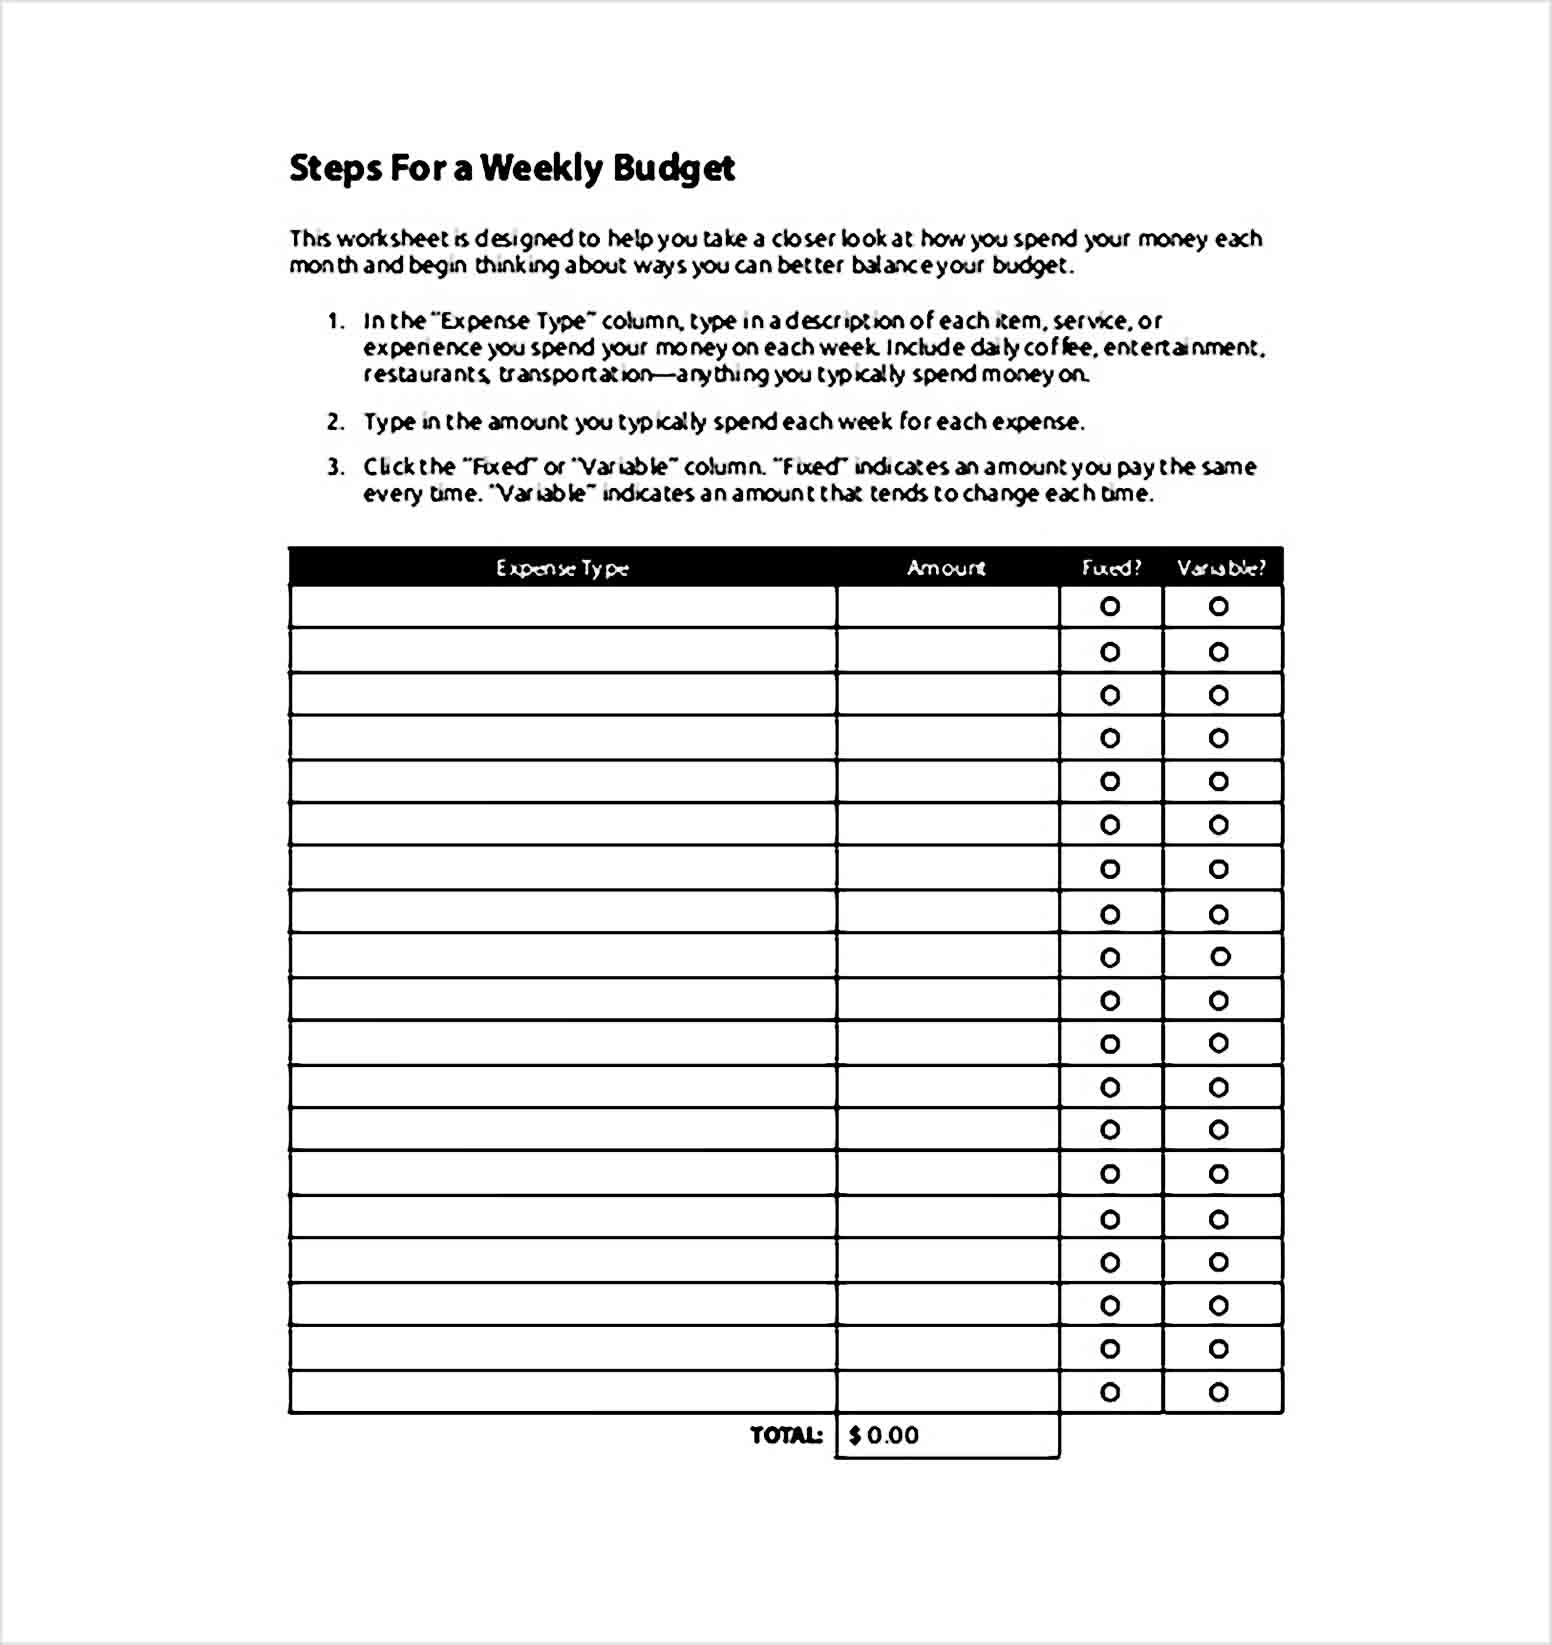 Steps For a Weekly Budget PDF Download